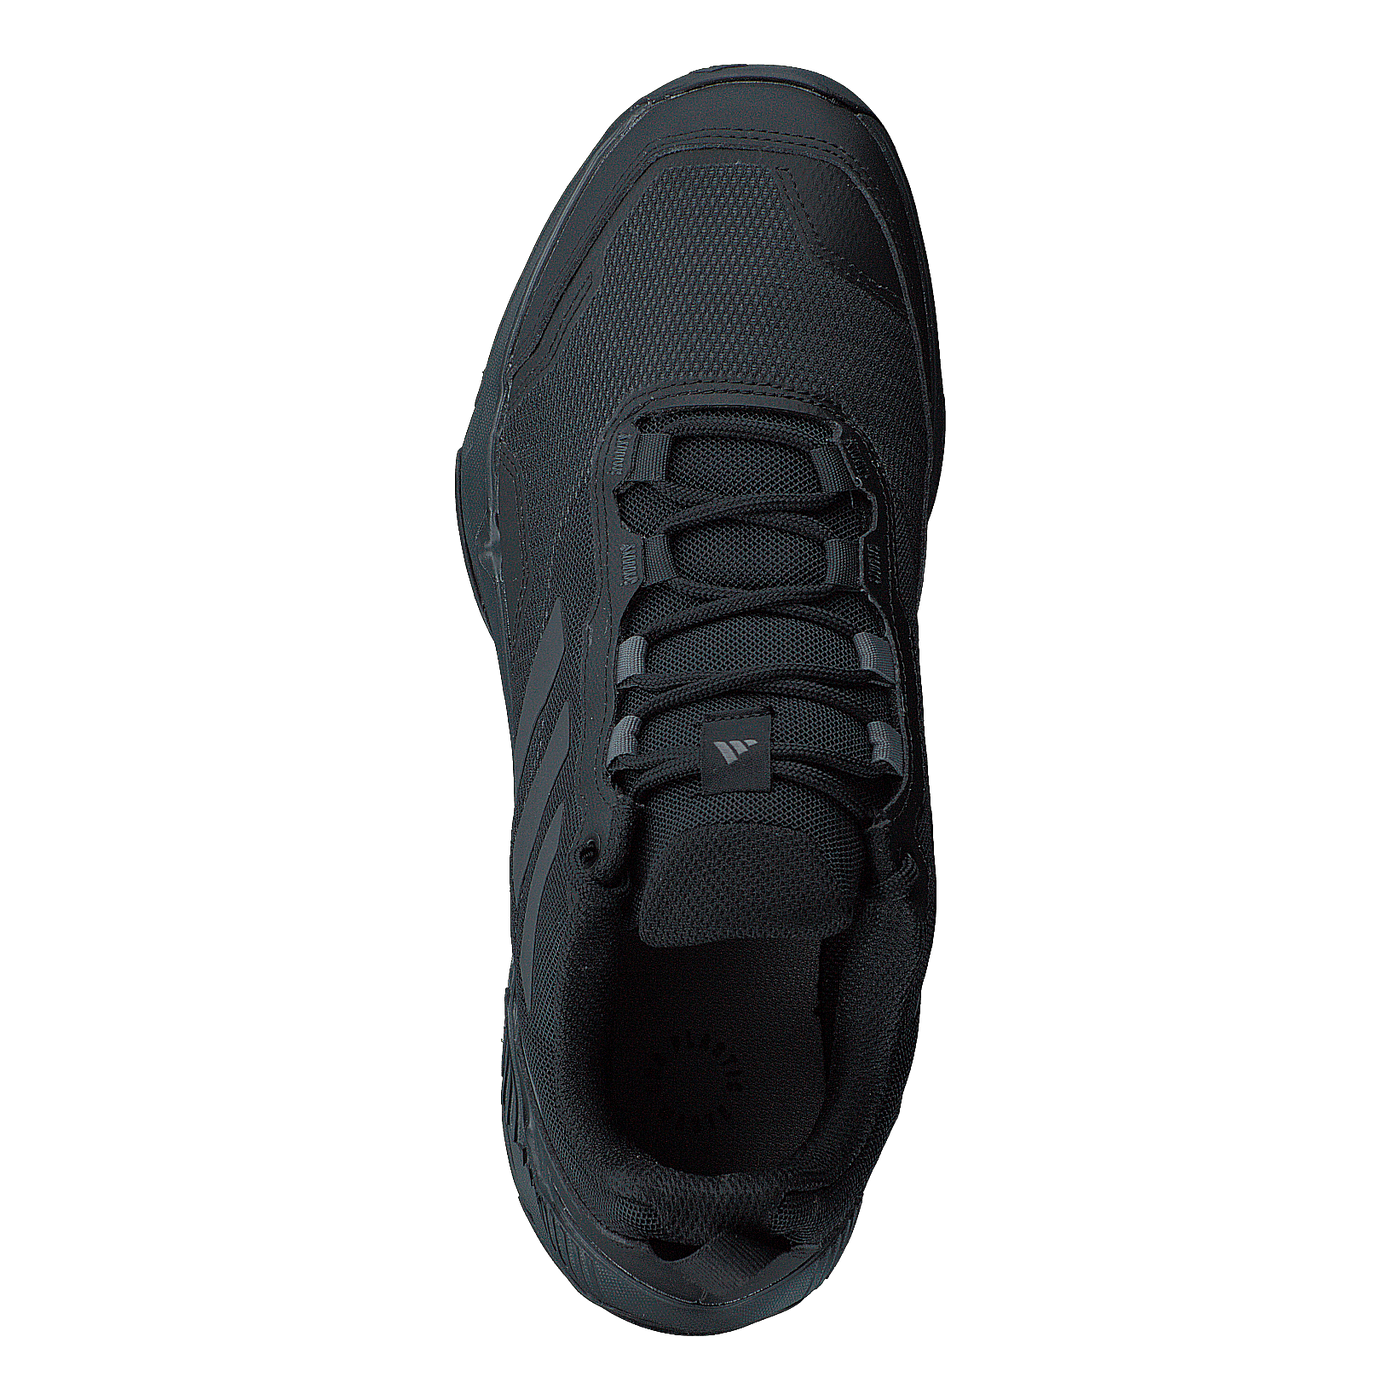 Eastrail 2.0 Hiking Shoes Core Black / Carbon / Grey Four